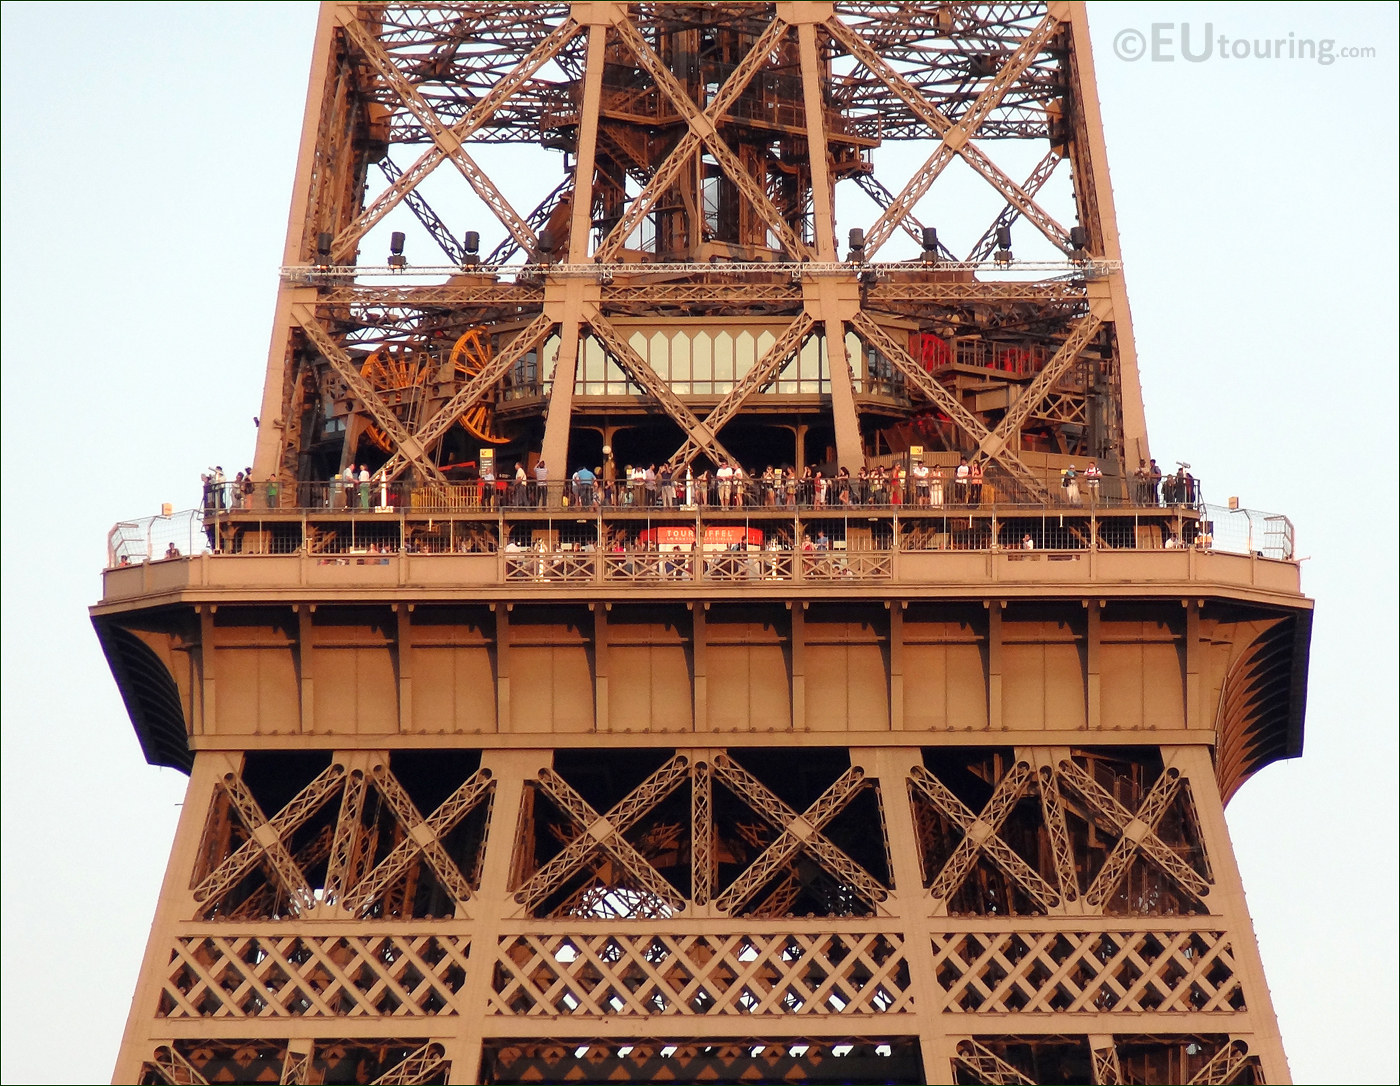 Photo Of The Eiffel Tower Middle Section And Viewing Platform - Page 14